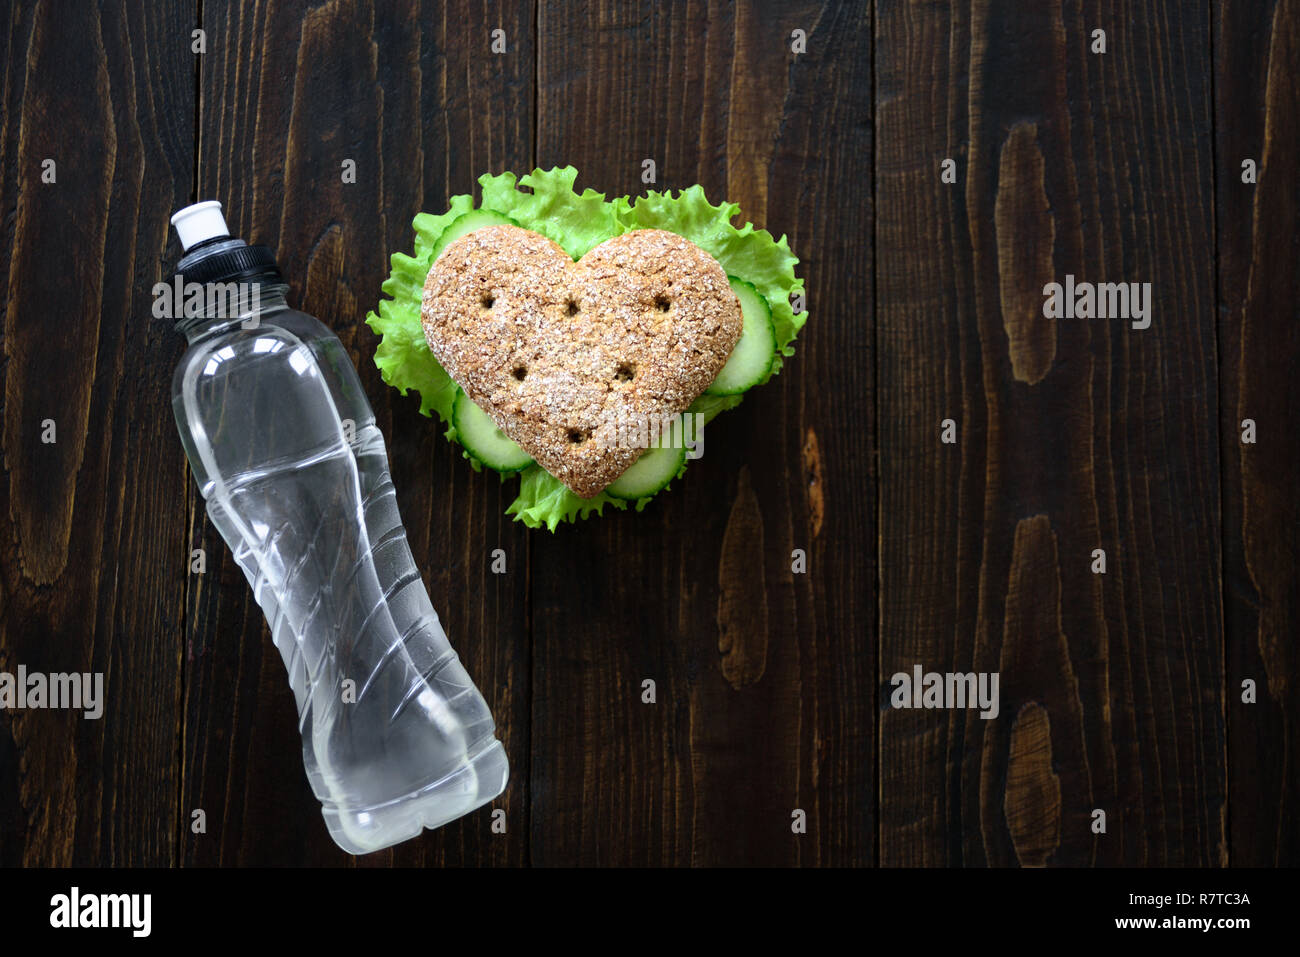 Healthy heart shape sandwich with salad and cucumbers. Dieting concept. Wooden background. Water bottle Stock Photo